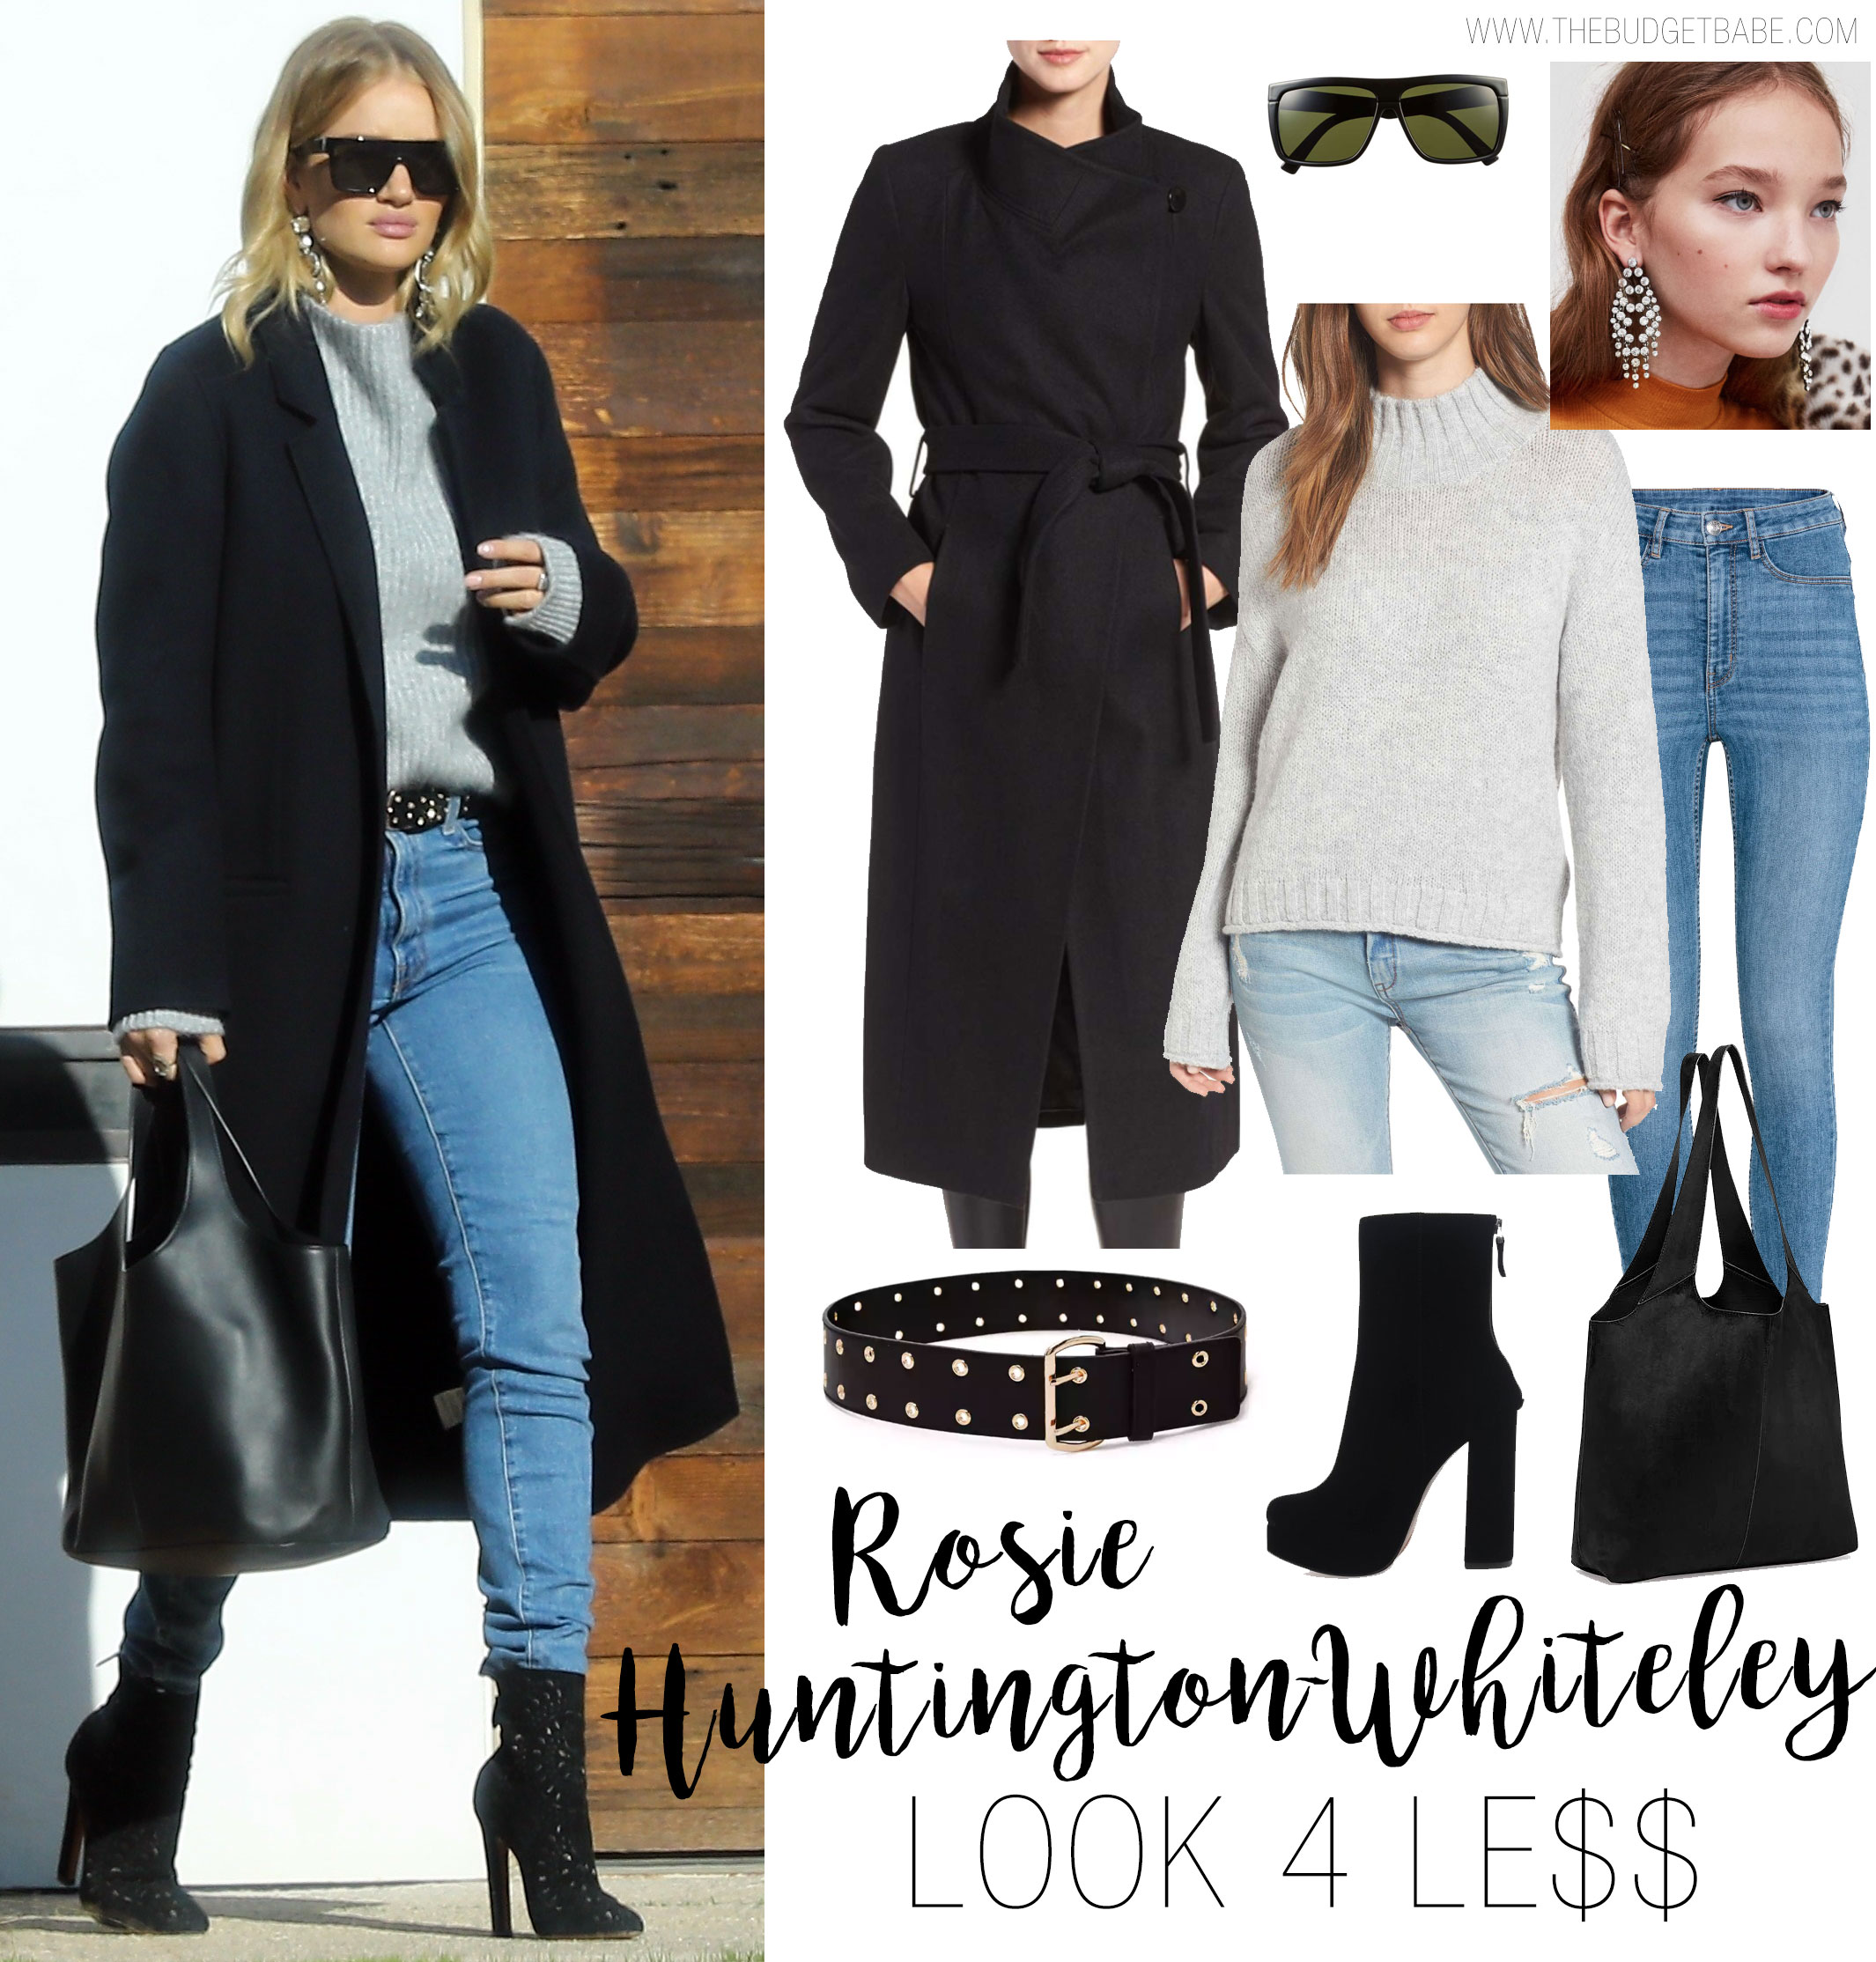 Rosie Huntington-Whiteley's black wool coat, grey sweater, skinny jeans and ankle boots celebrity look for less outfit idea